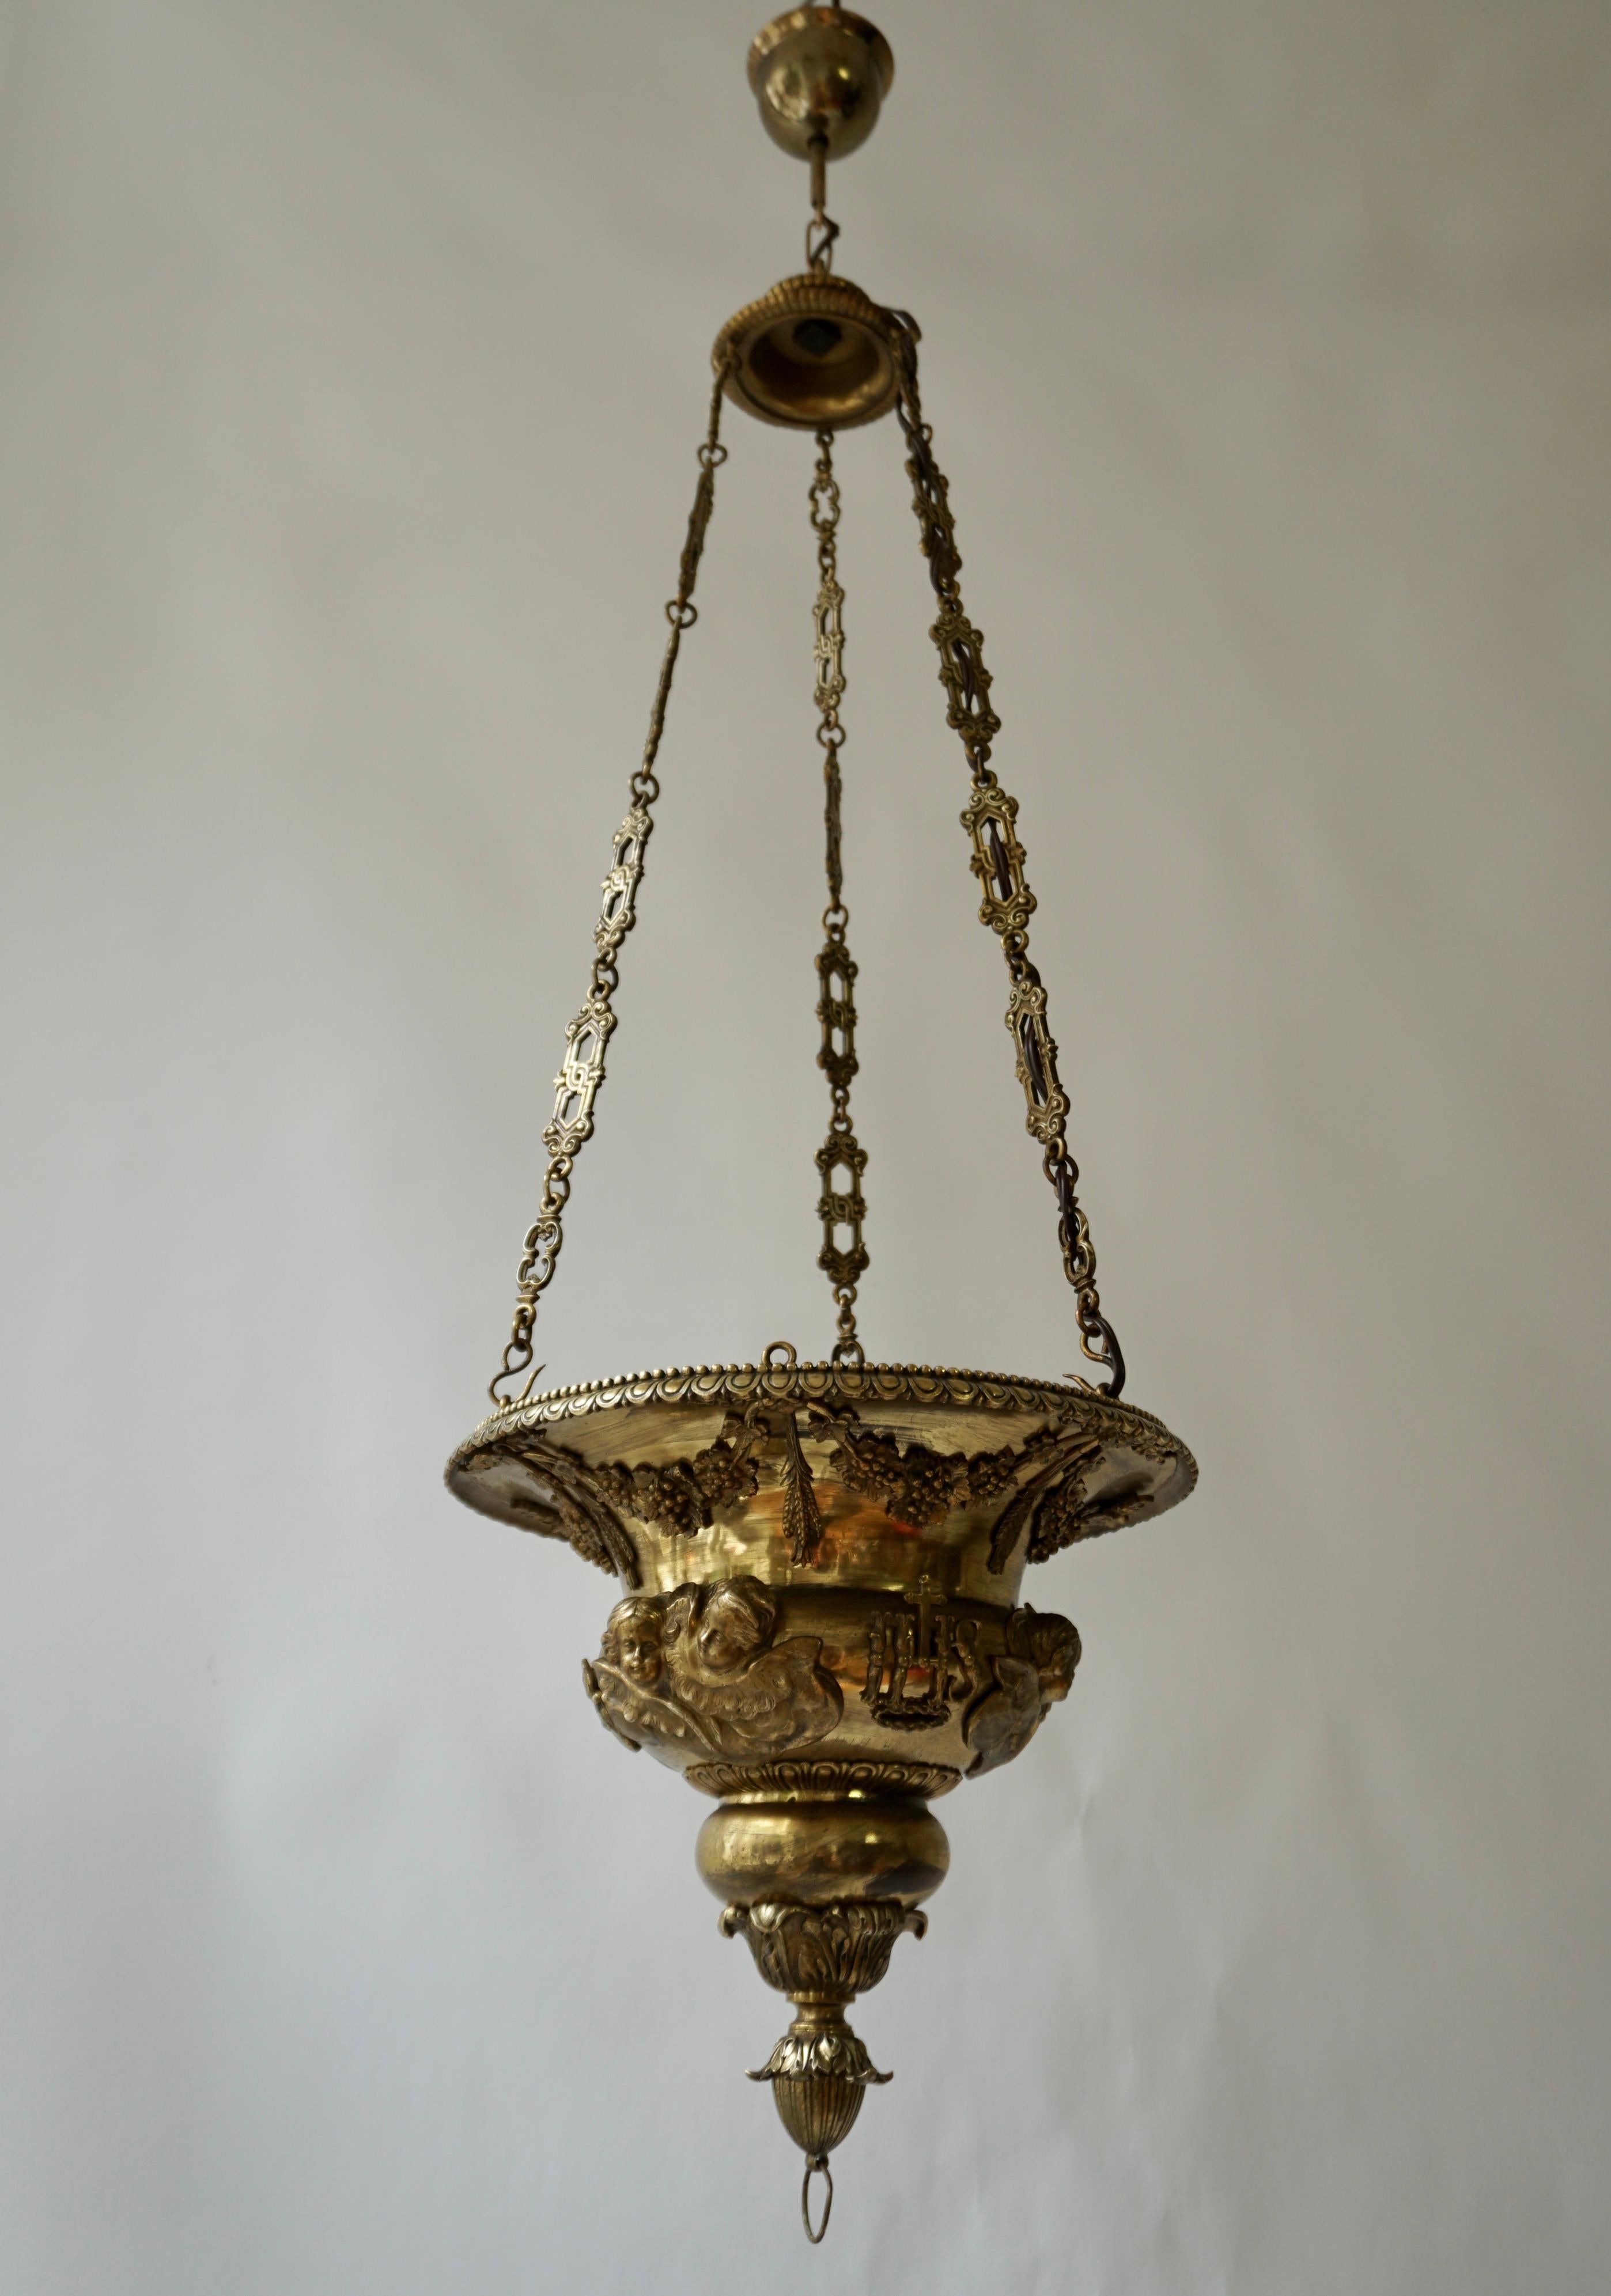 A baroque sanctuary lamp or holy water bowl of hammered yellow copper. Decorated with winged angel heads grape tendrils.

Total height 49